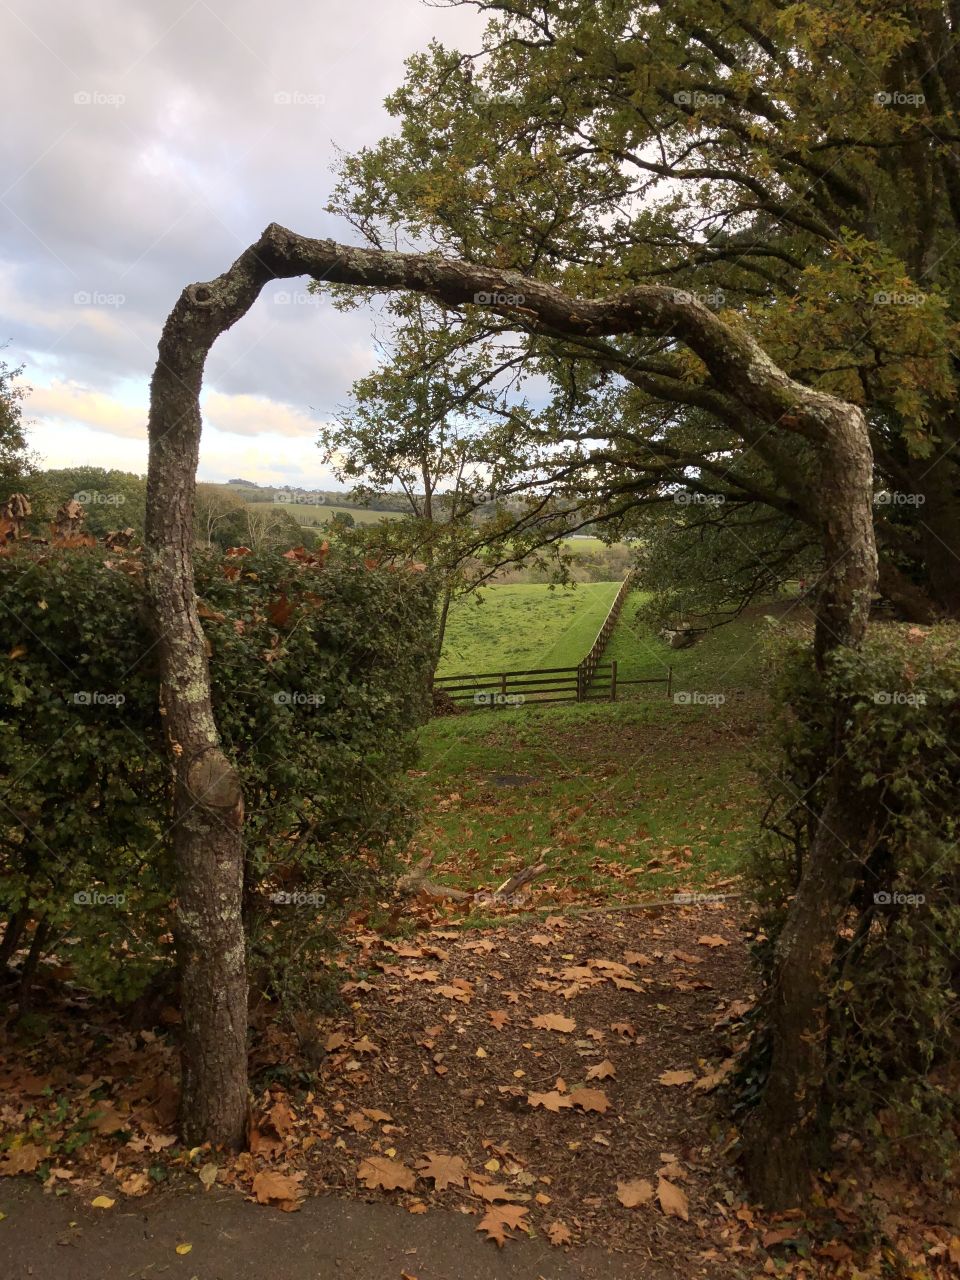 Autumn once more and this scene is particularly lovely as a result of this fab shaped archway.